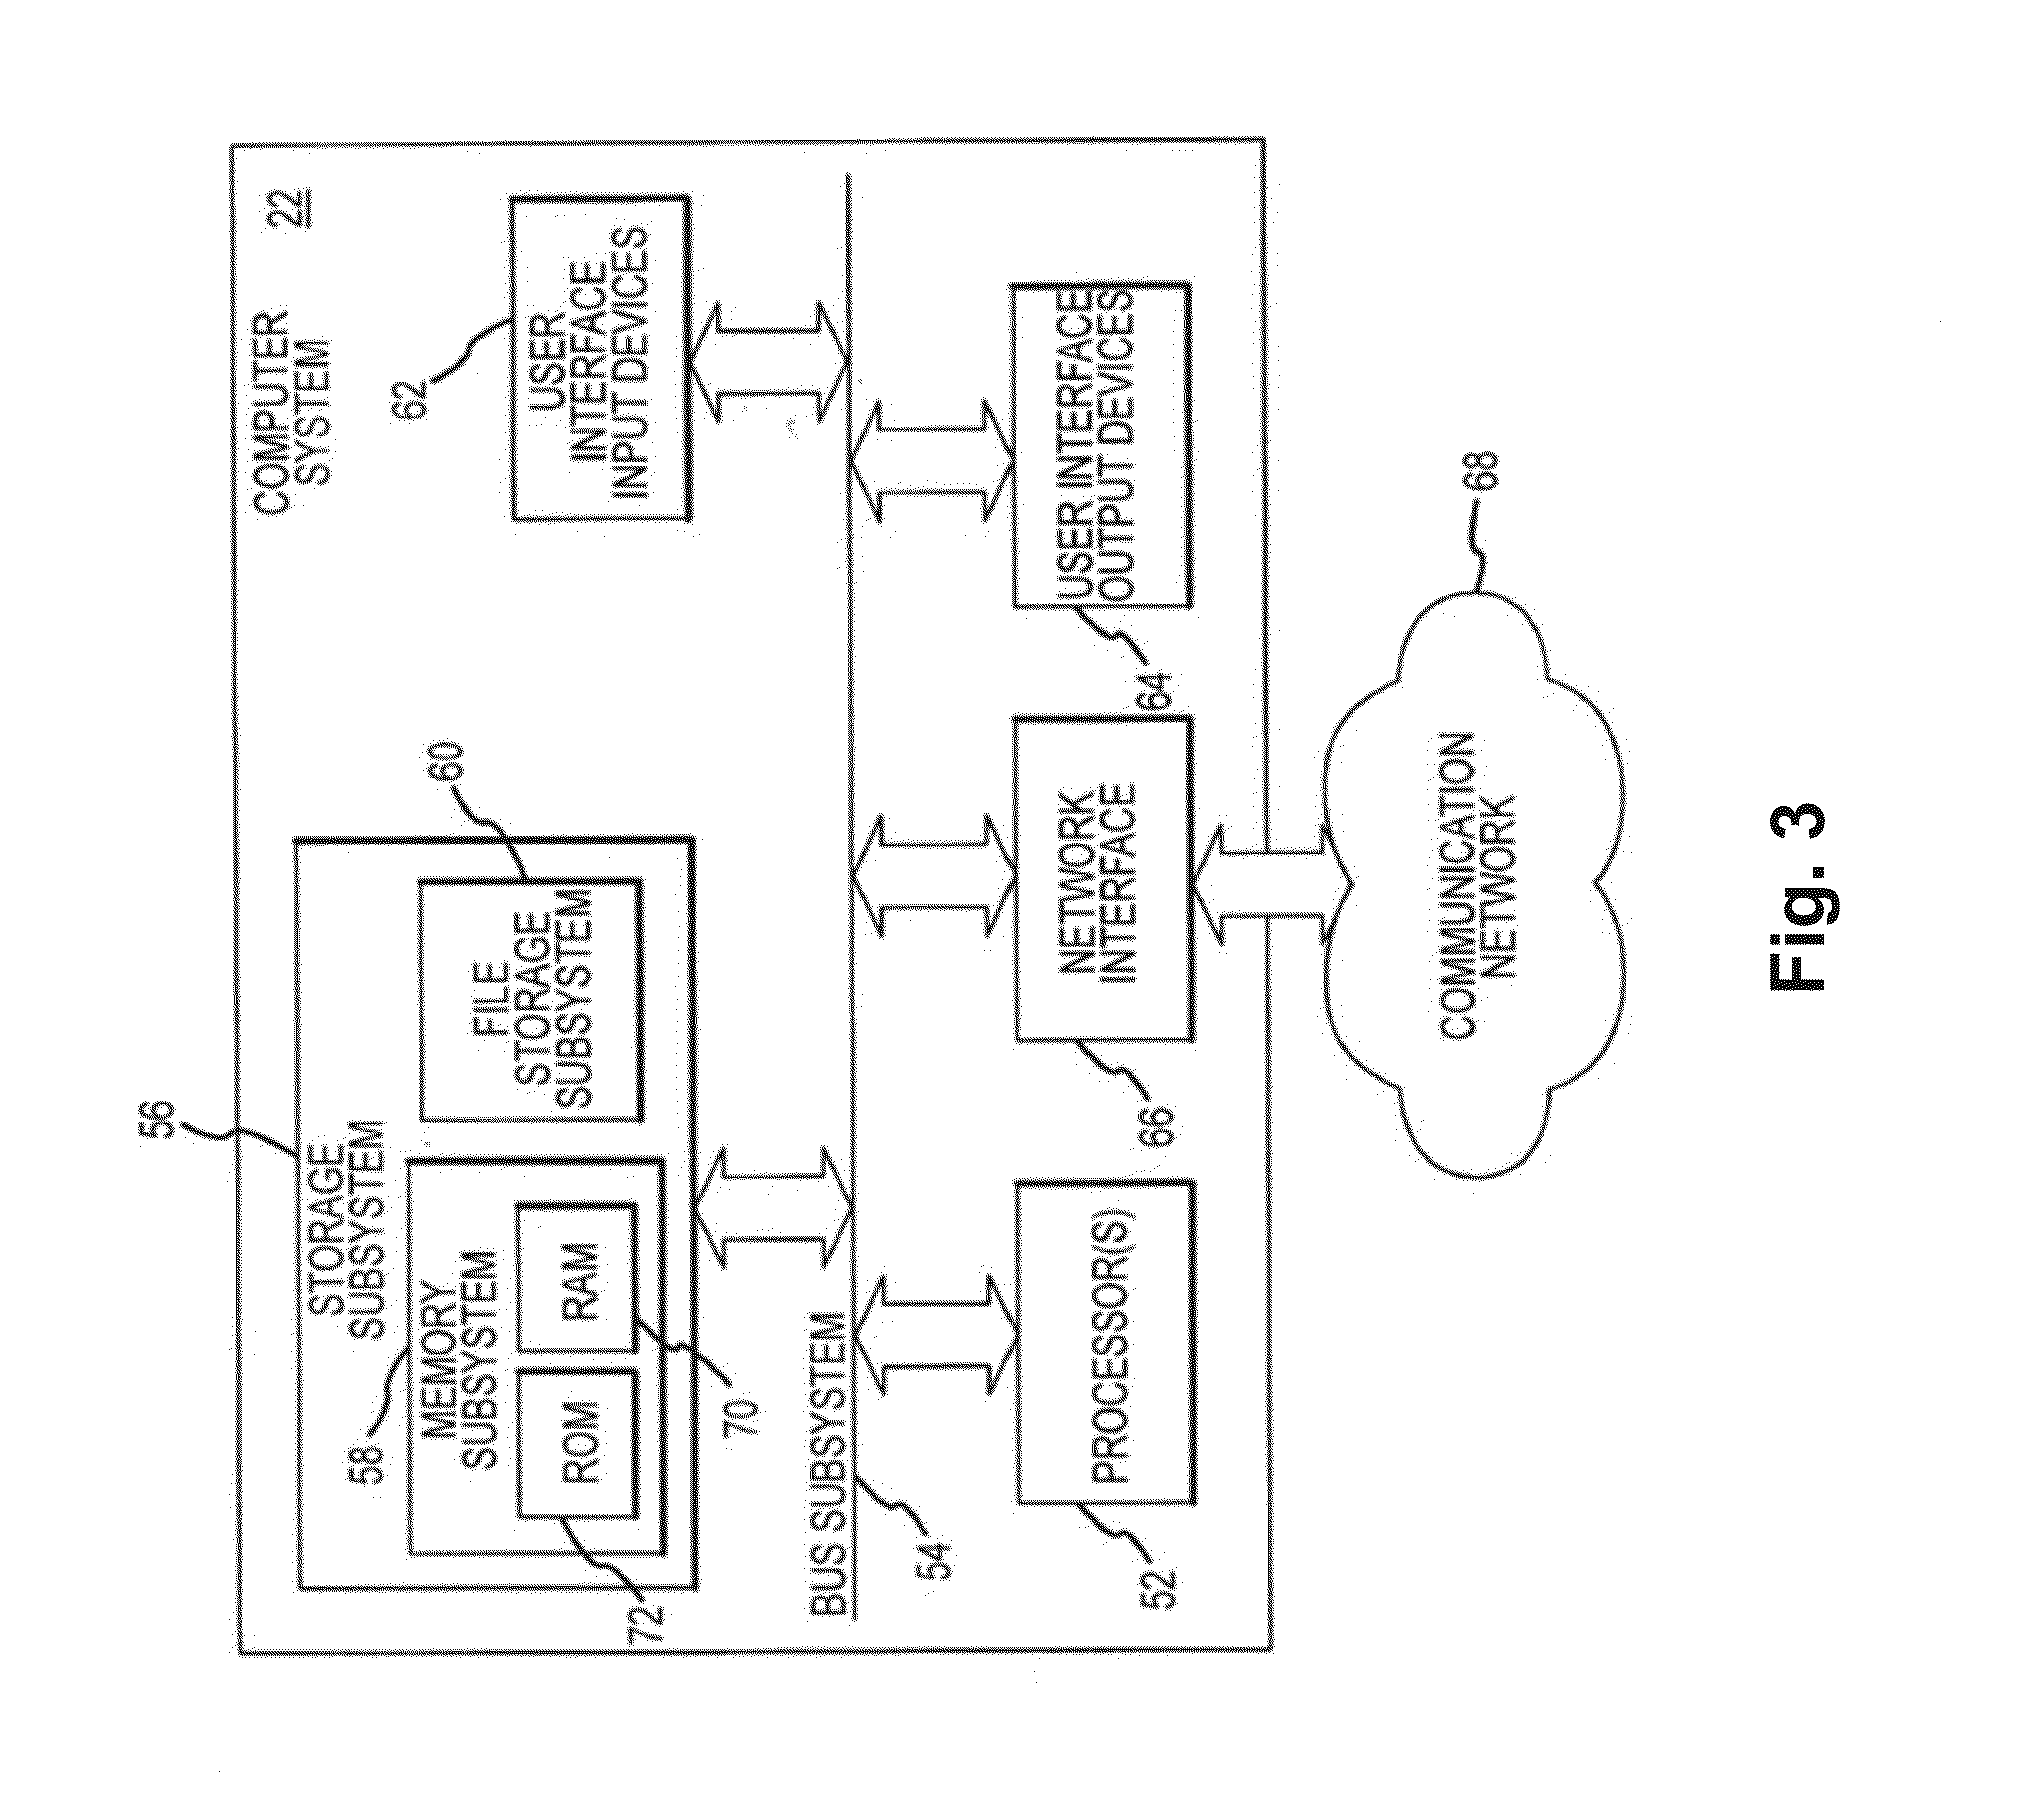 Systems and methods for synchronized three-dimensional laser incisions